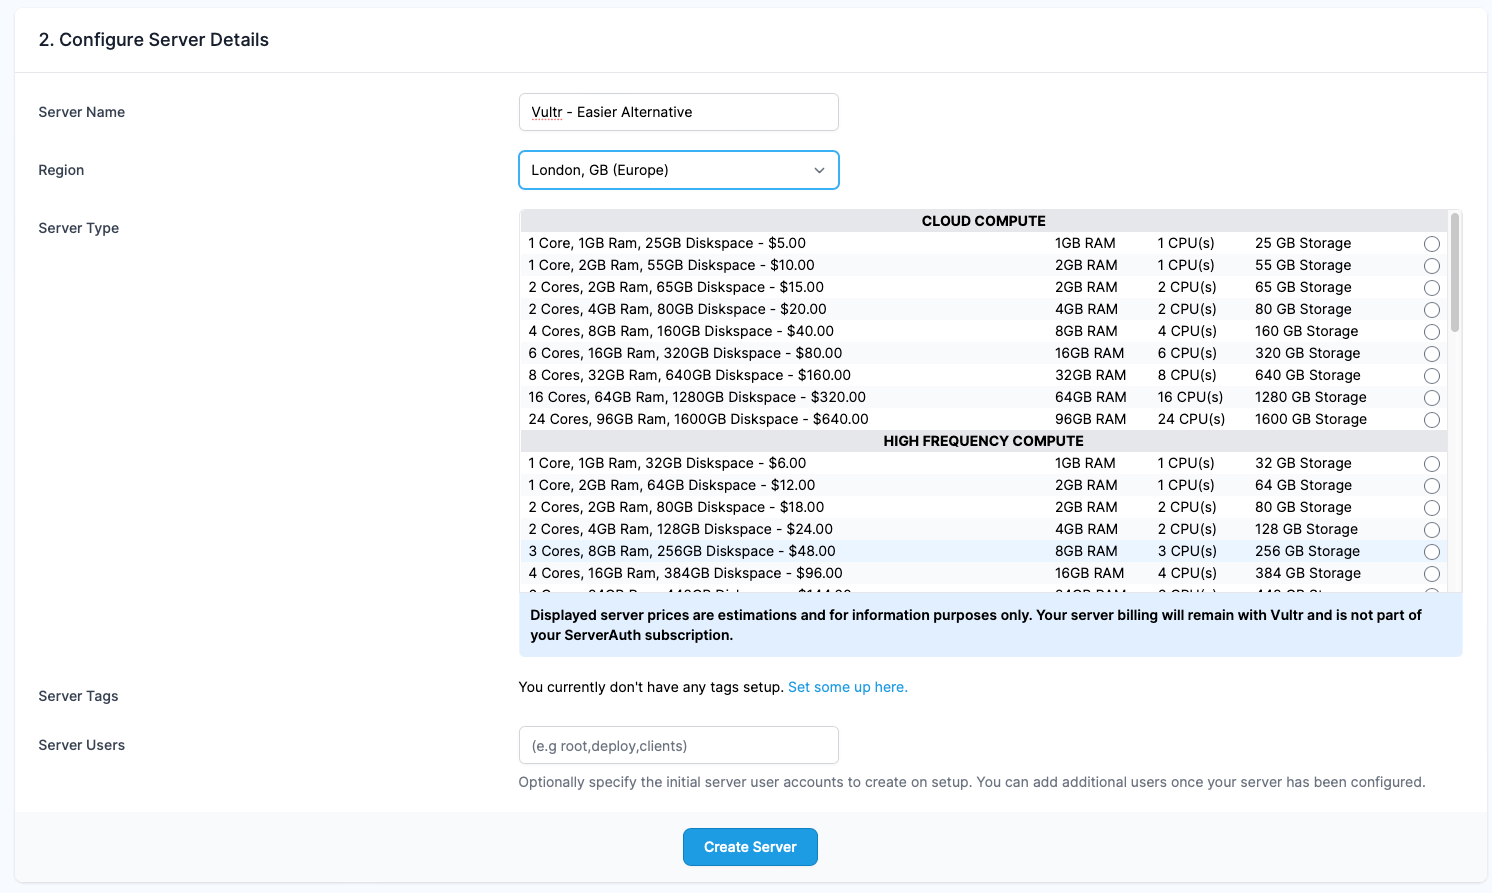 Screenshot showing the Vultr Prices and server types